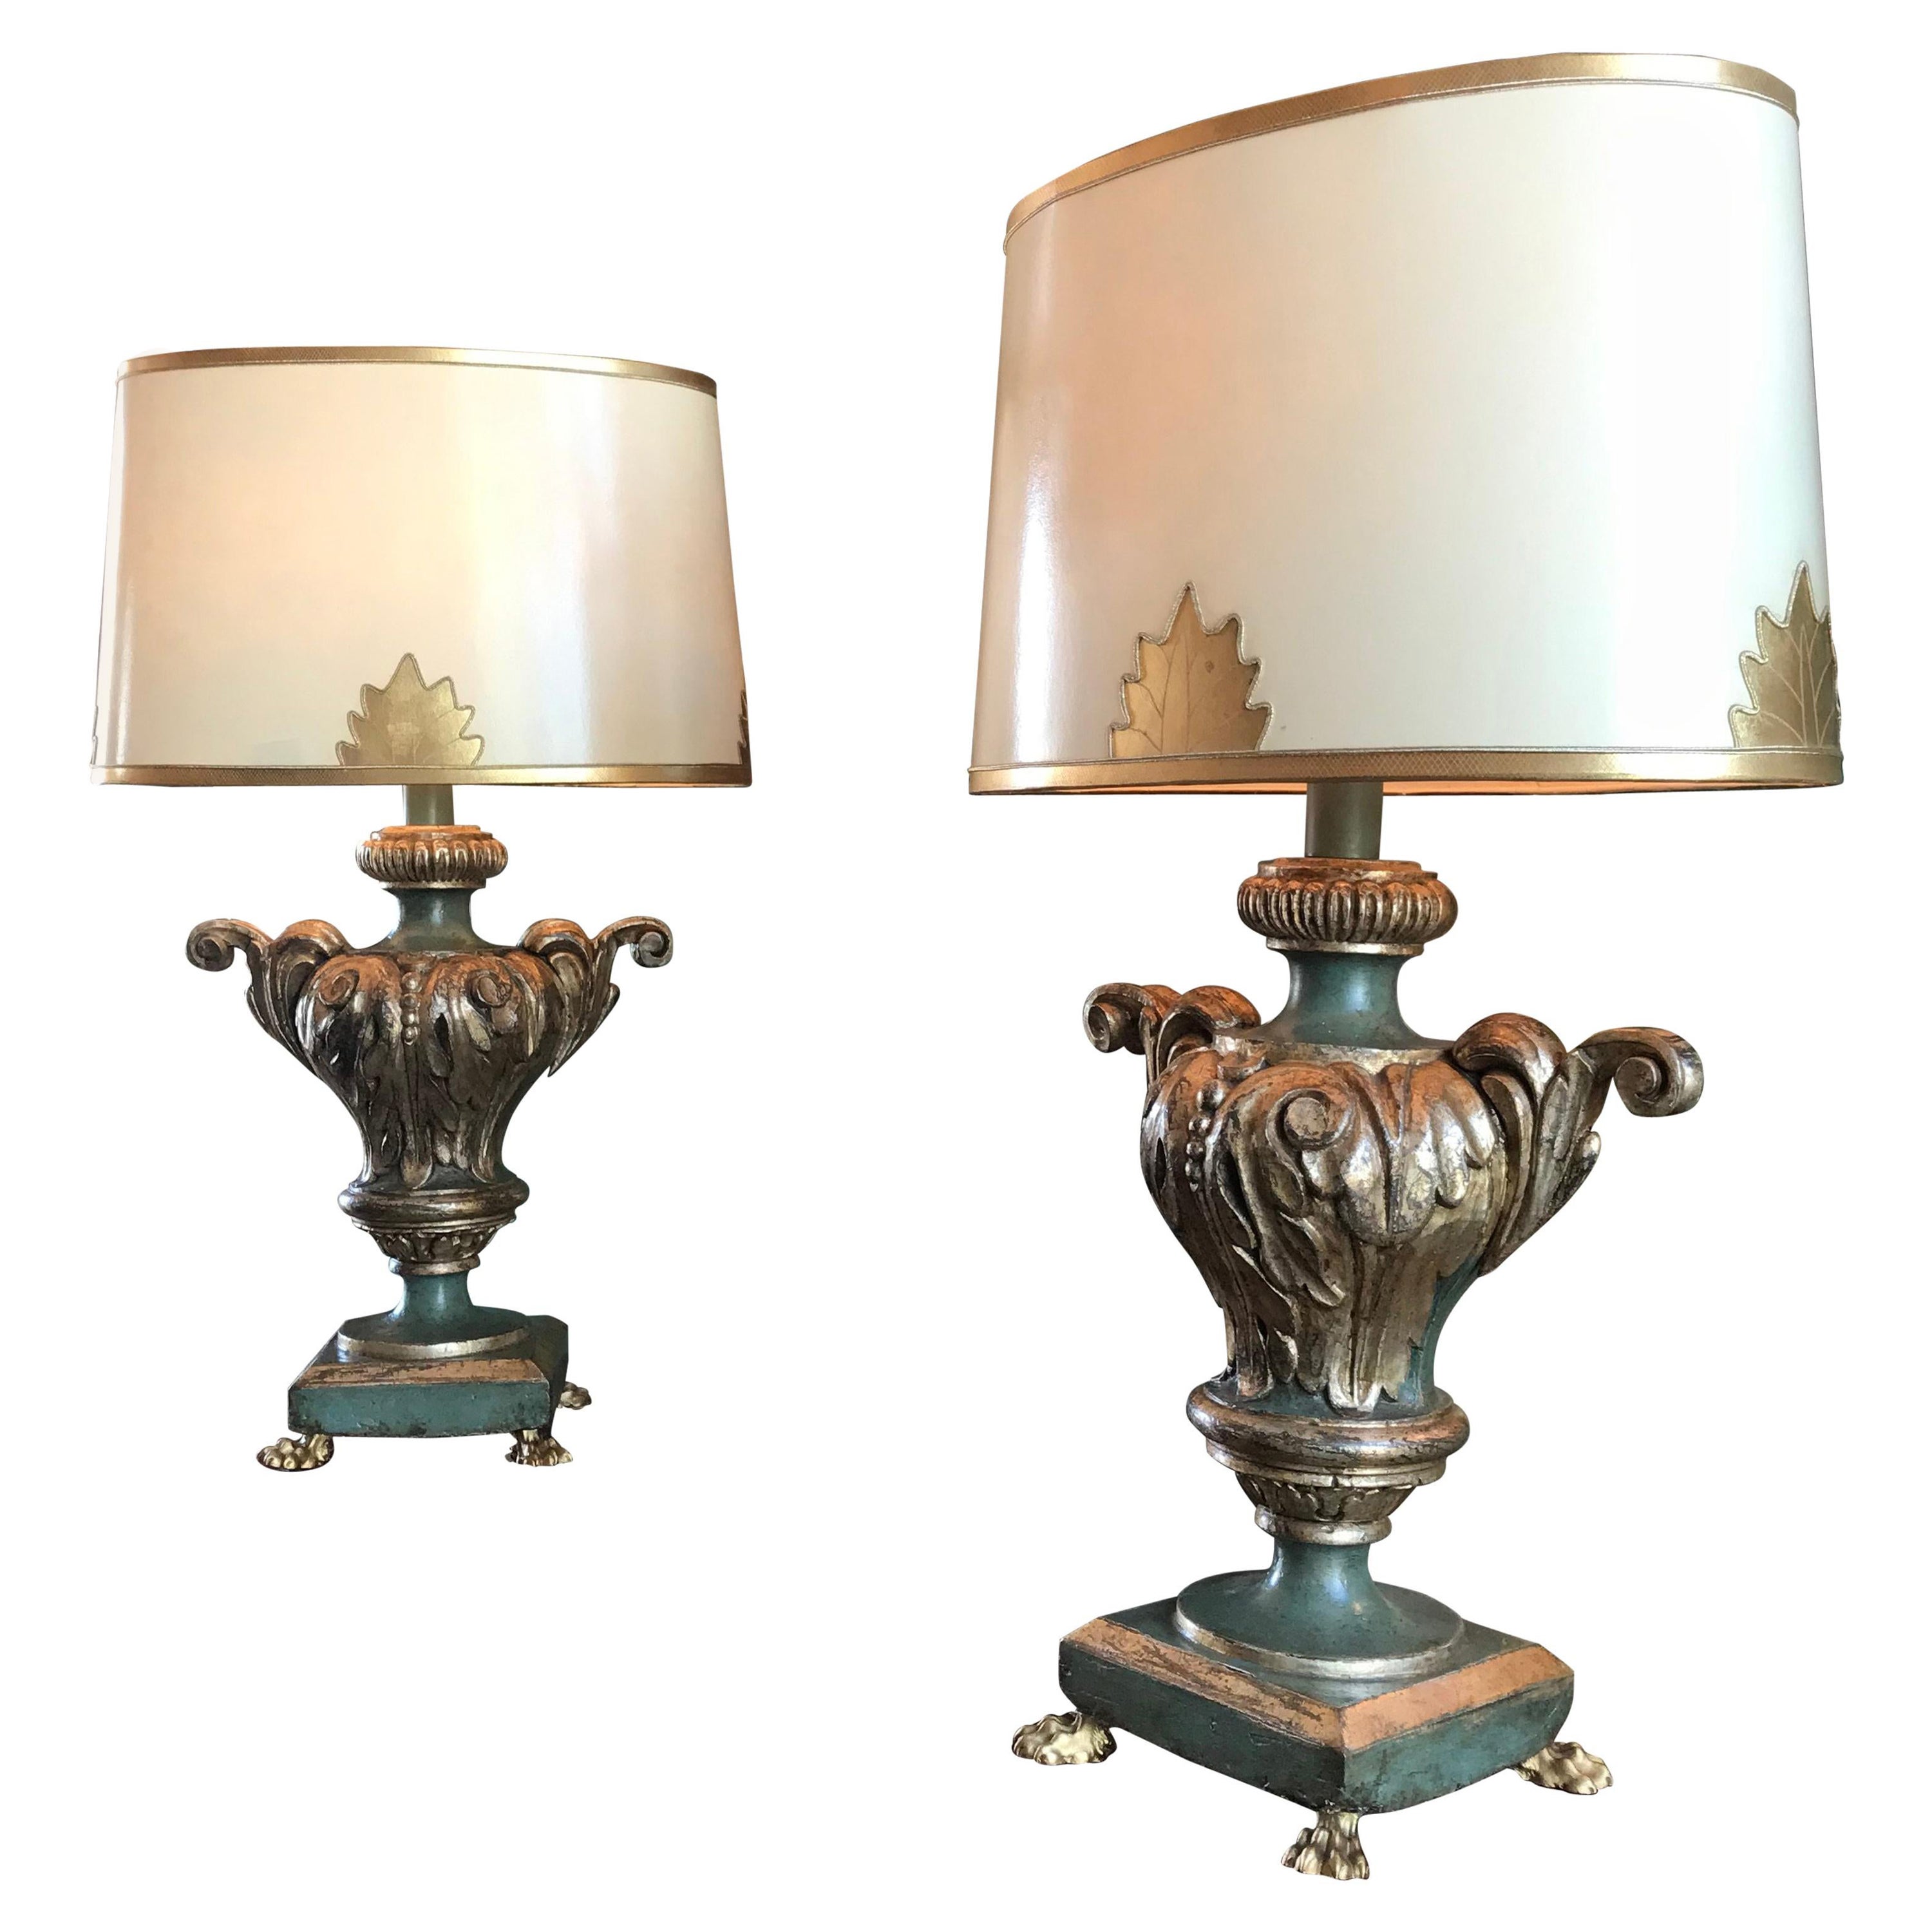 Pair Table Lamps Antique Venetian Carved Wood Urns Gilt Green / Shades & Finial